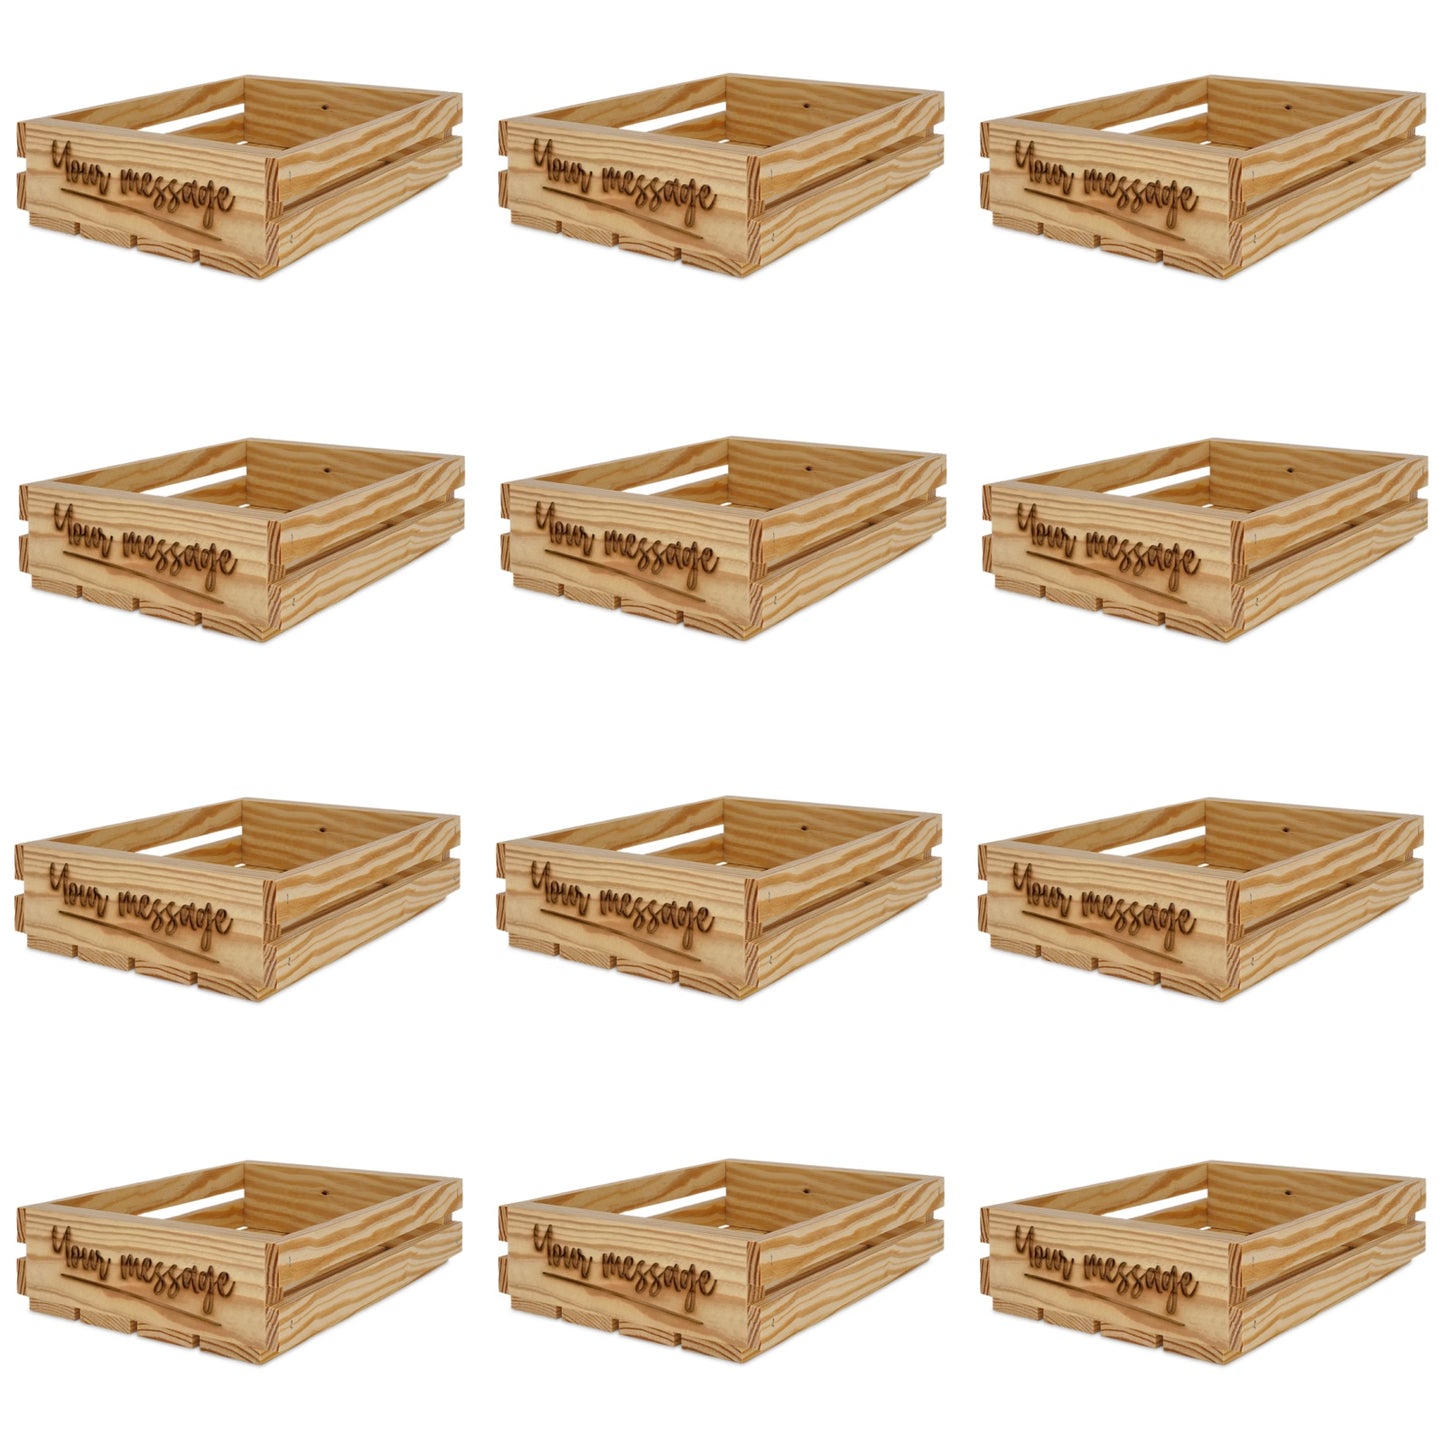 12 Small wooden crates with your message 10x8x2.5